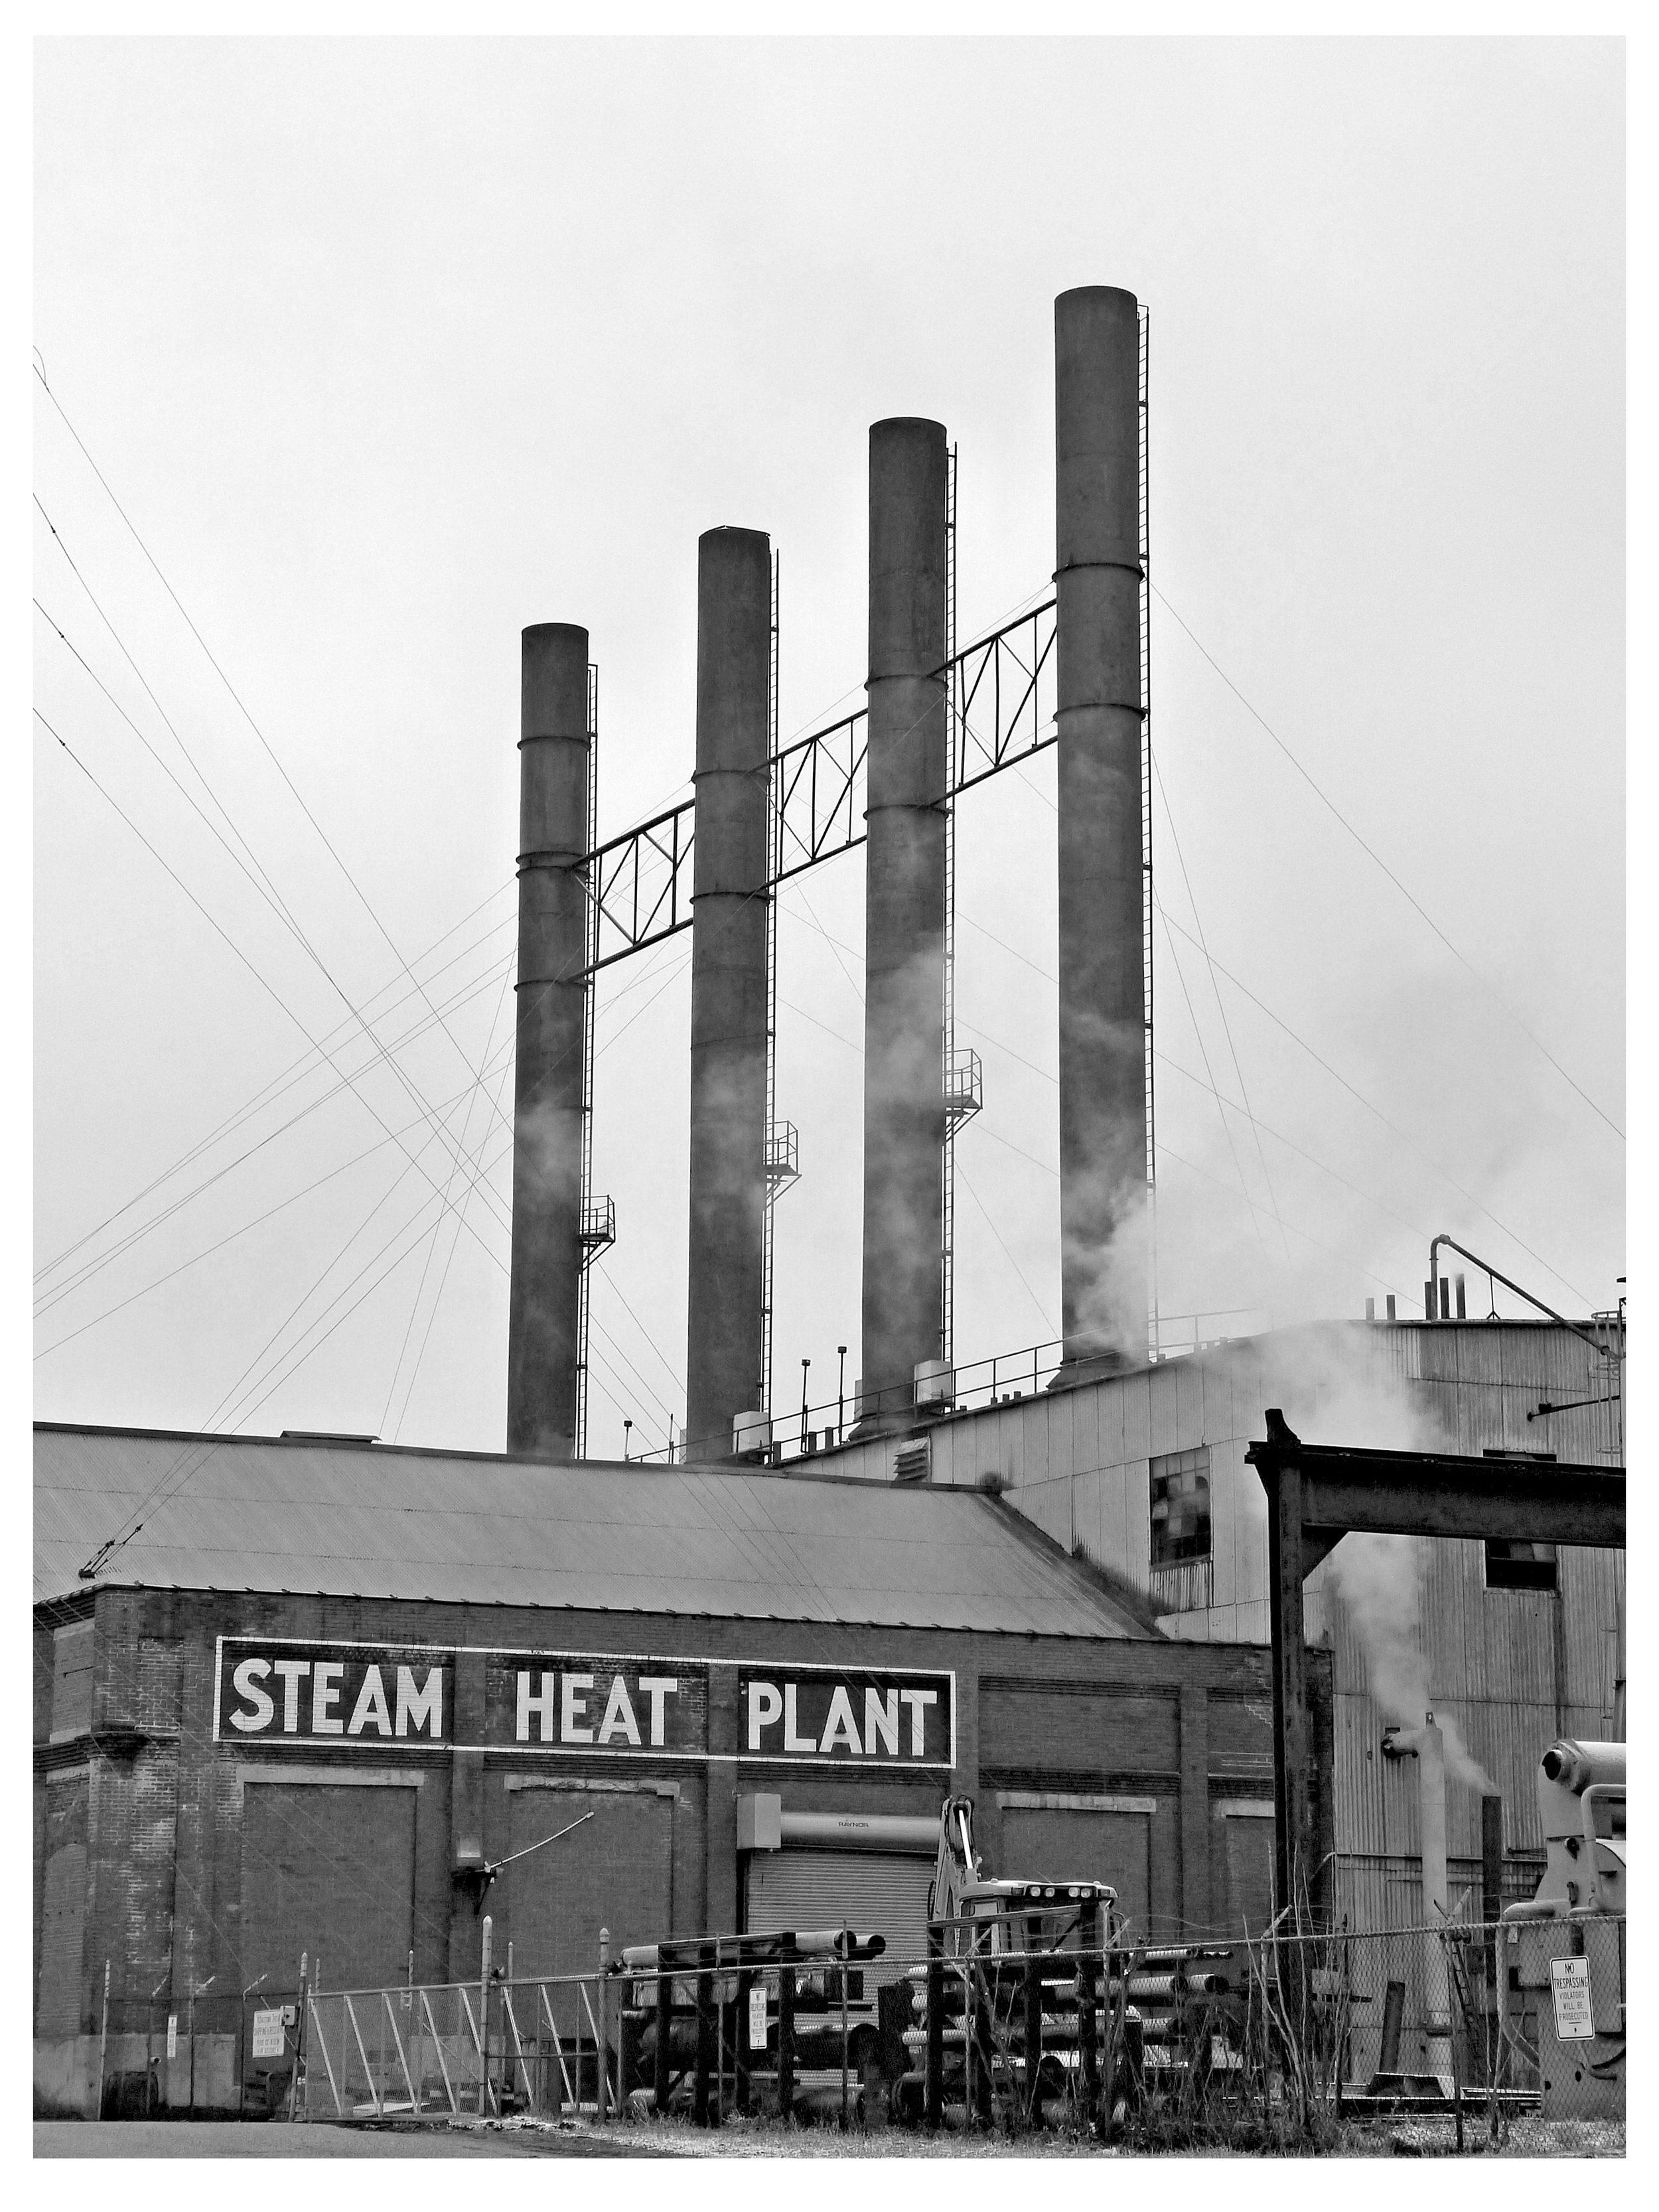 Steam Heat Plant, Youngstown, Ohio